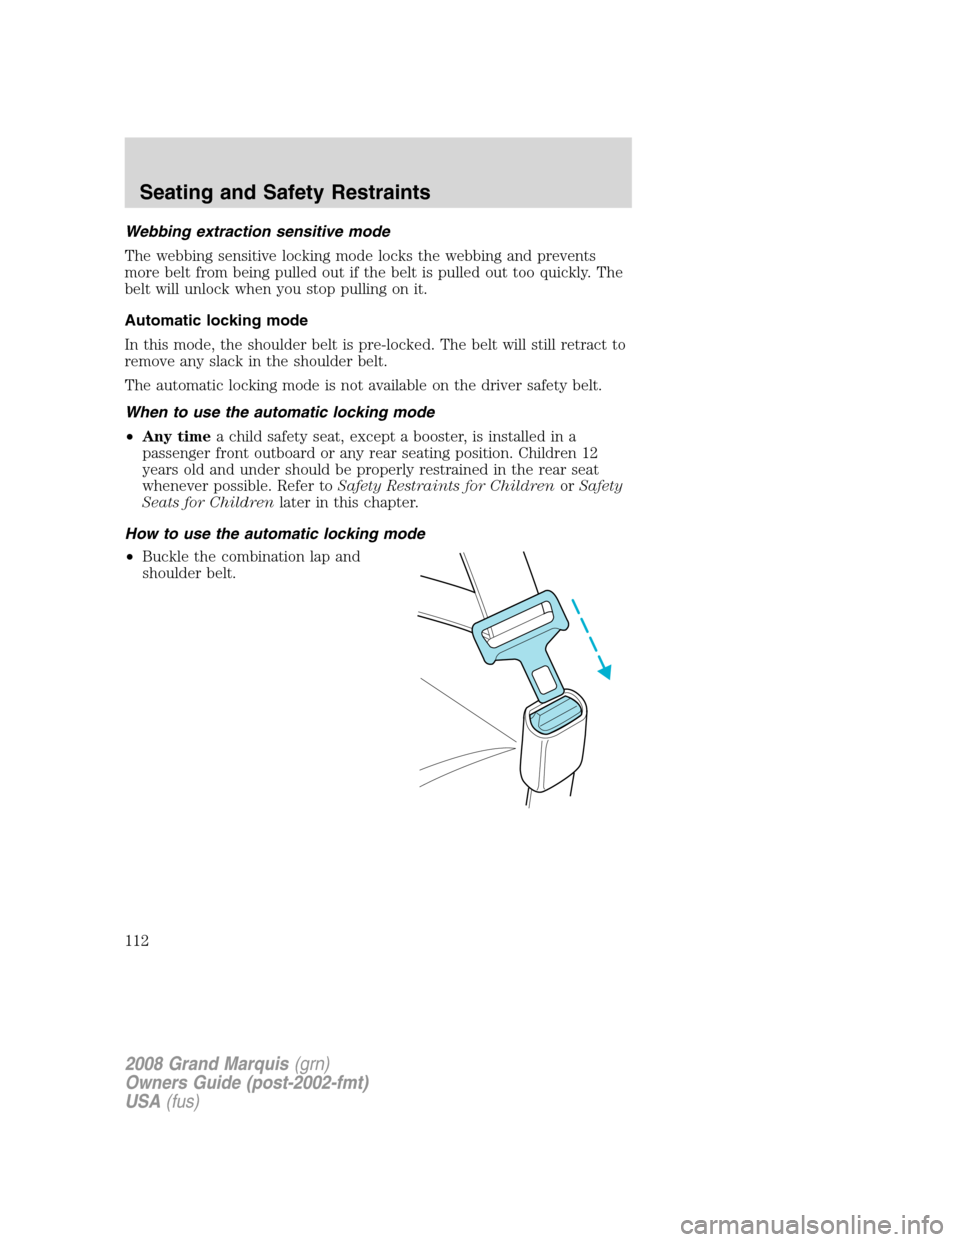 Mercury Grand Marquis 2008  Owners Manuals Webbing extraction sensitive mode
The webbing sensitive locking mode locks the webbing and prevents
more belt from being pulled out if the belt is pulled out too quickly. The
belt will unlock when you